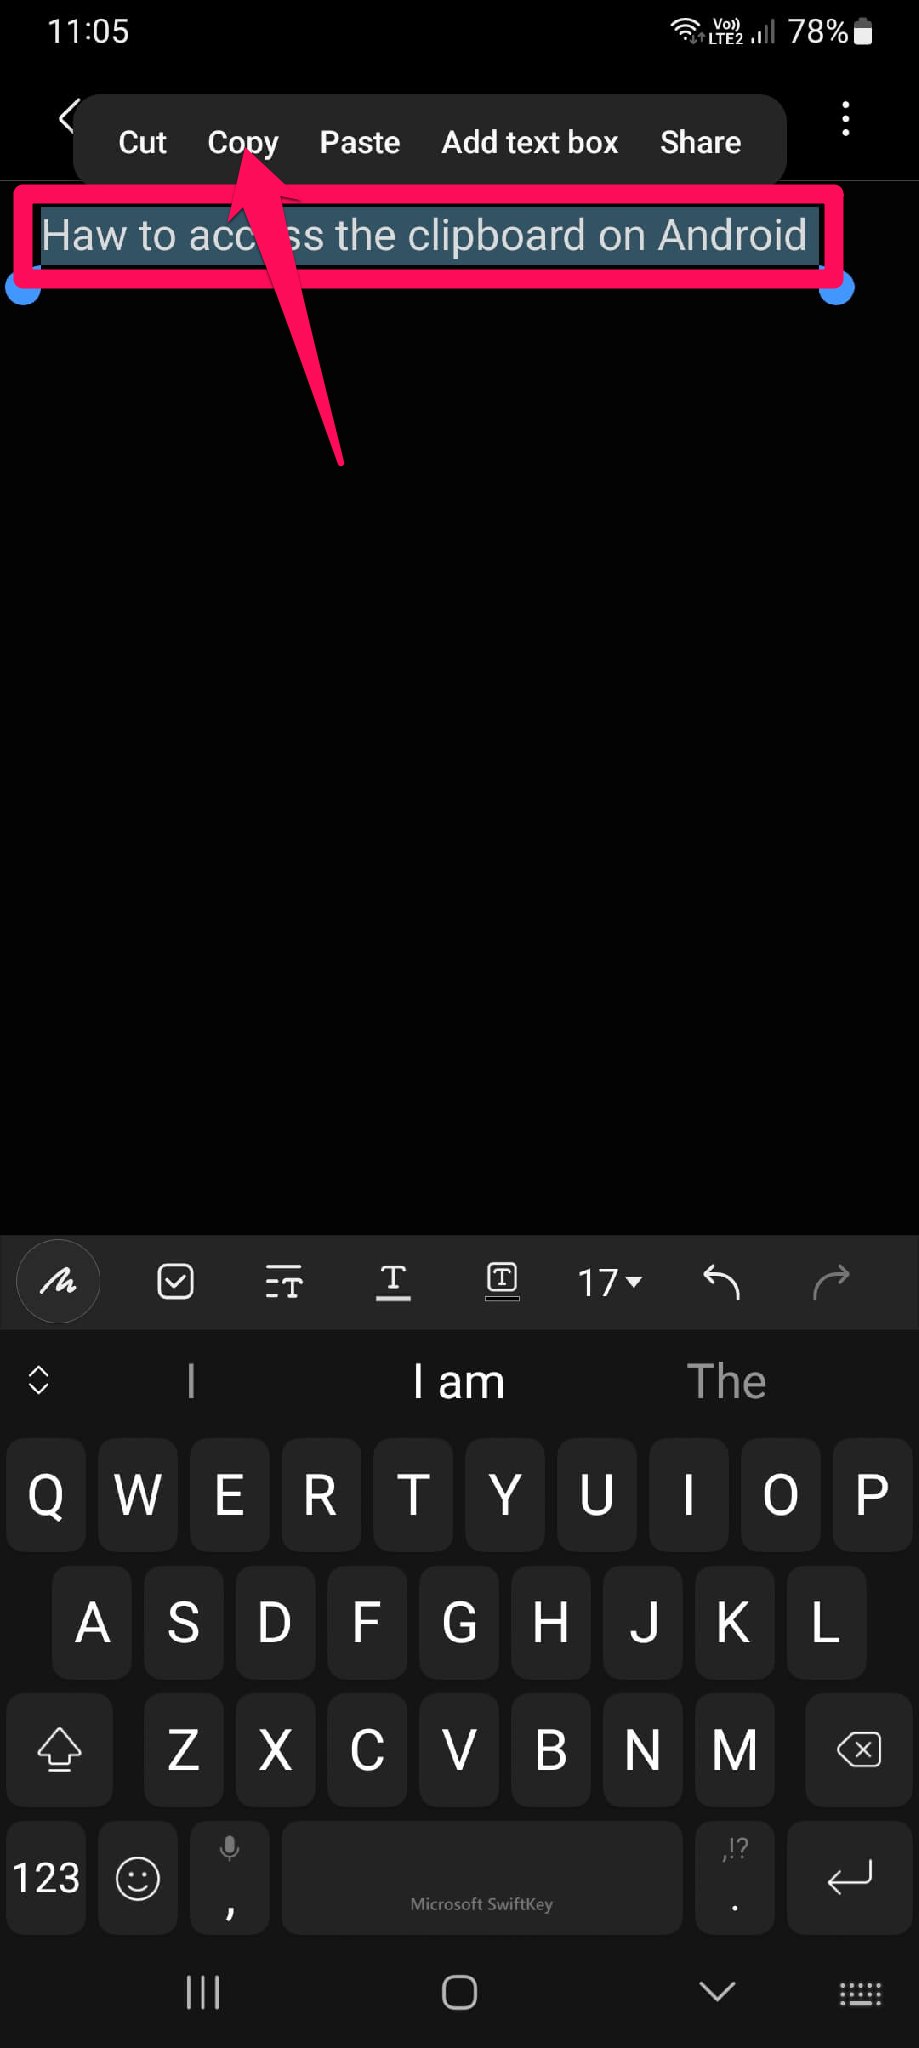 Copy words How to access the clipboard on Android